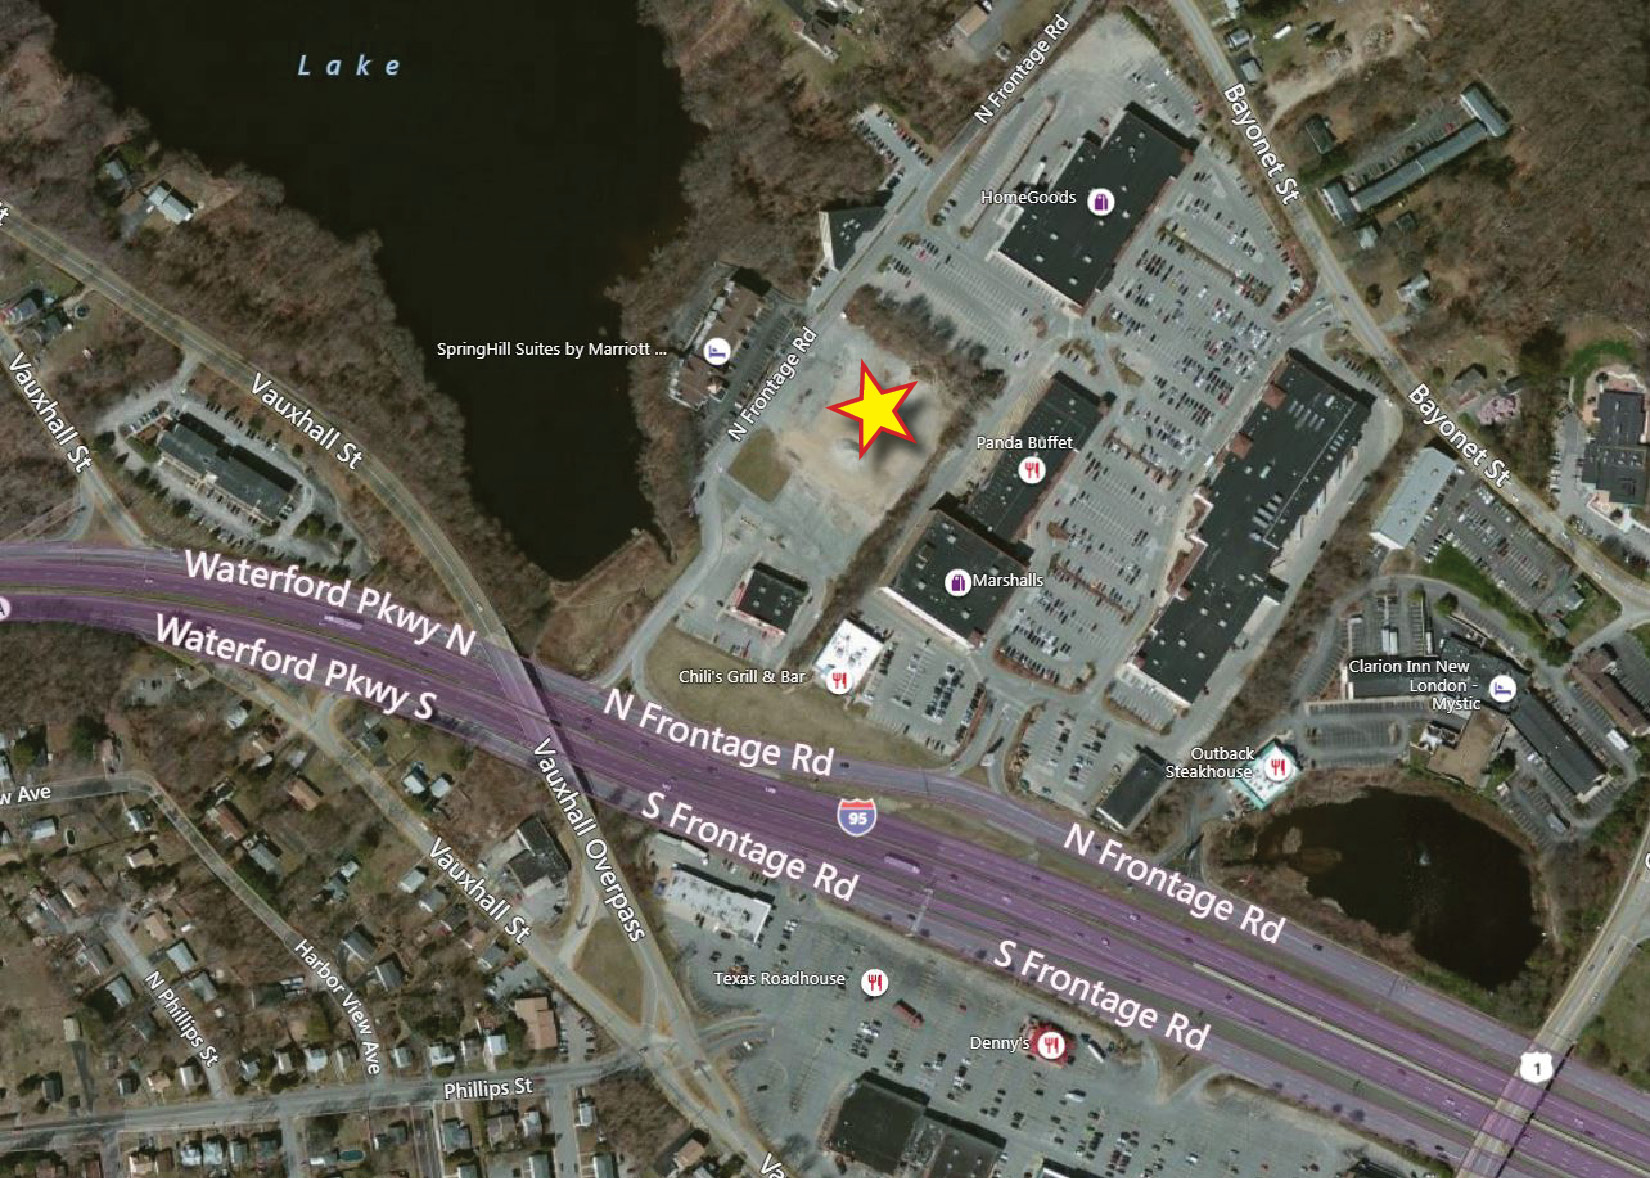 O,R&L Commercial Sells 2.1 Acres for Redevelopment – 1.35M, New London, CT